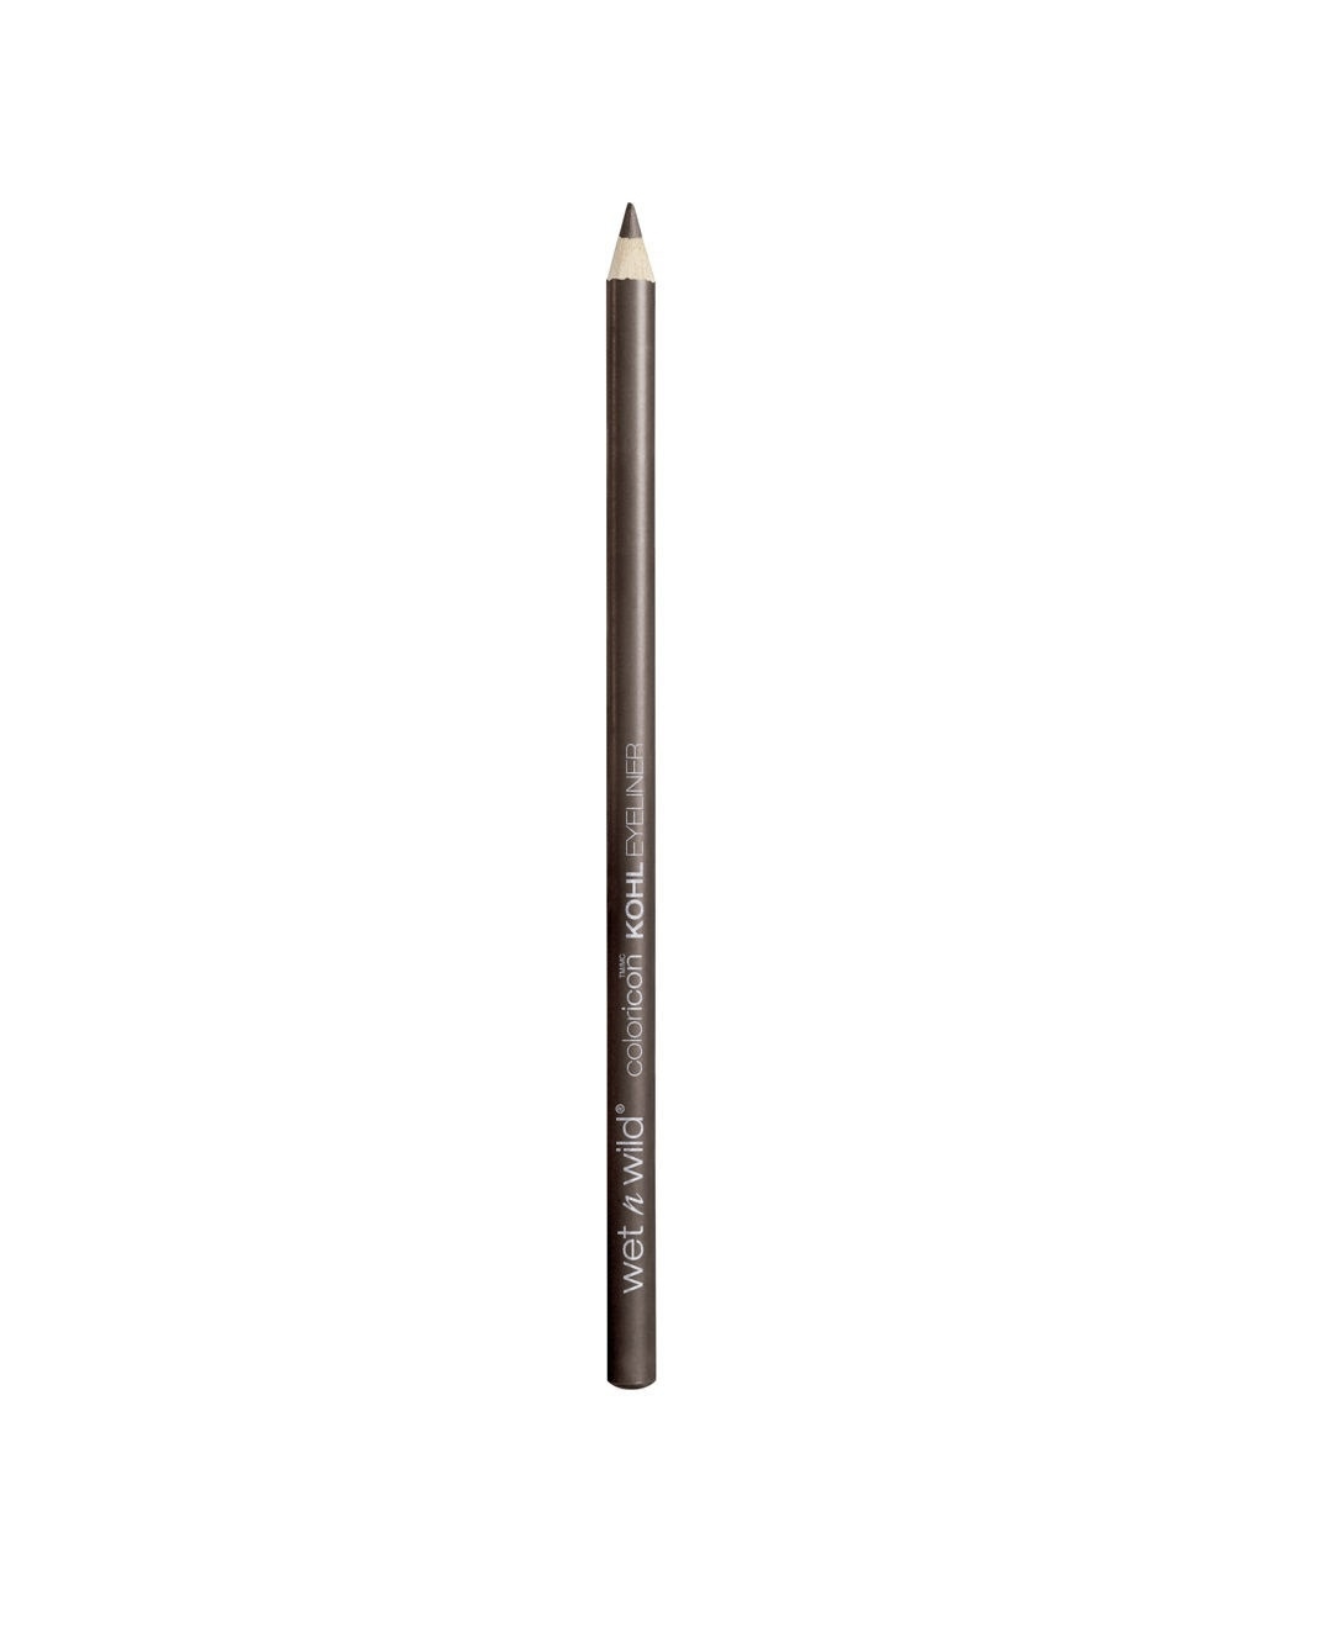     / Wet n Wild    Color Icon Kohl Eyeliner  E603A Sima brown now 1,4 